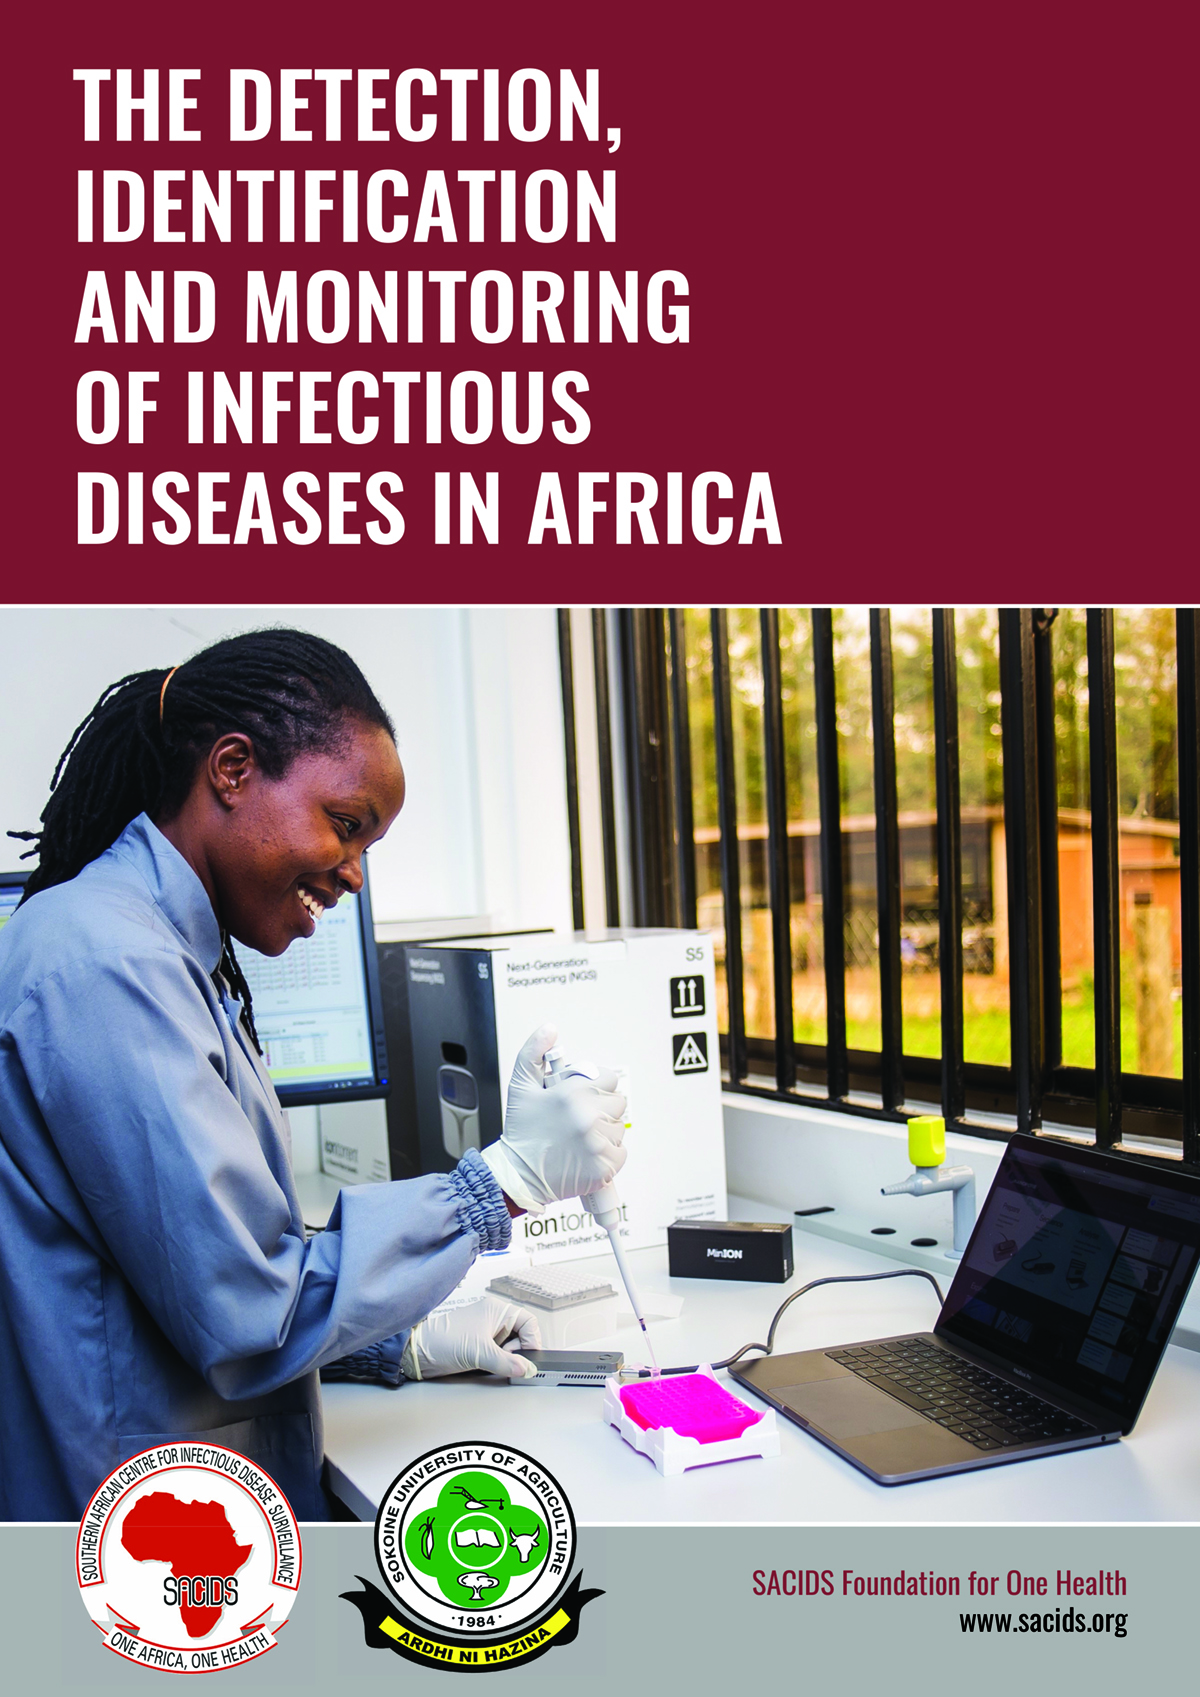 infectious diseases in Africa